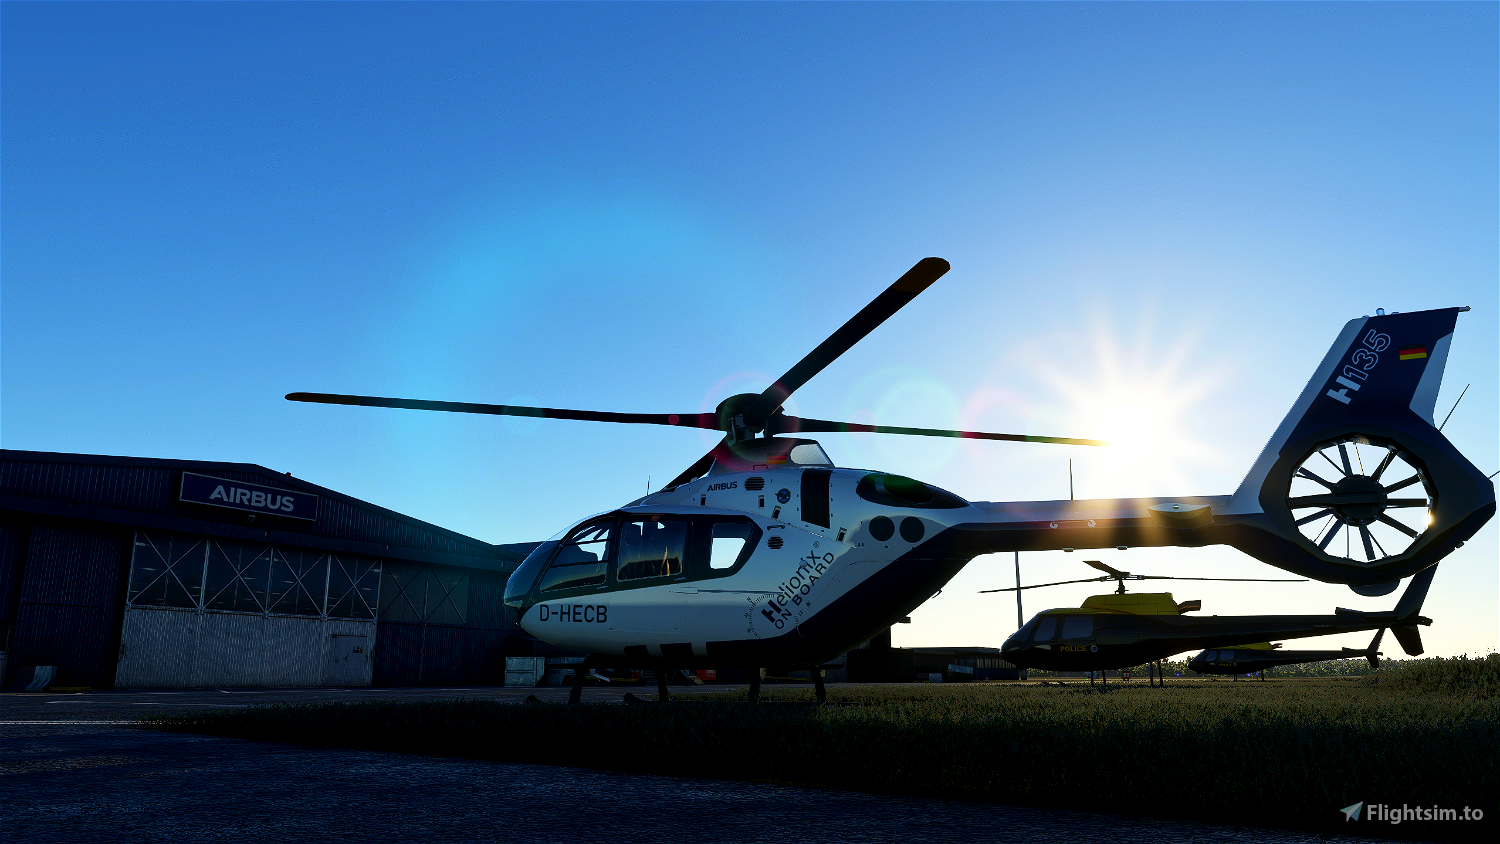 Helicopters for Microsoft Flight Simulator, MSFS